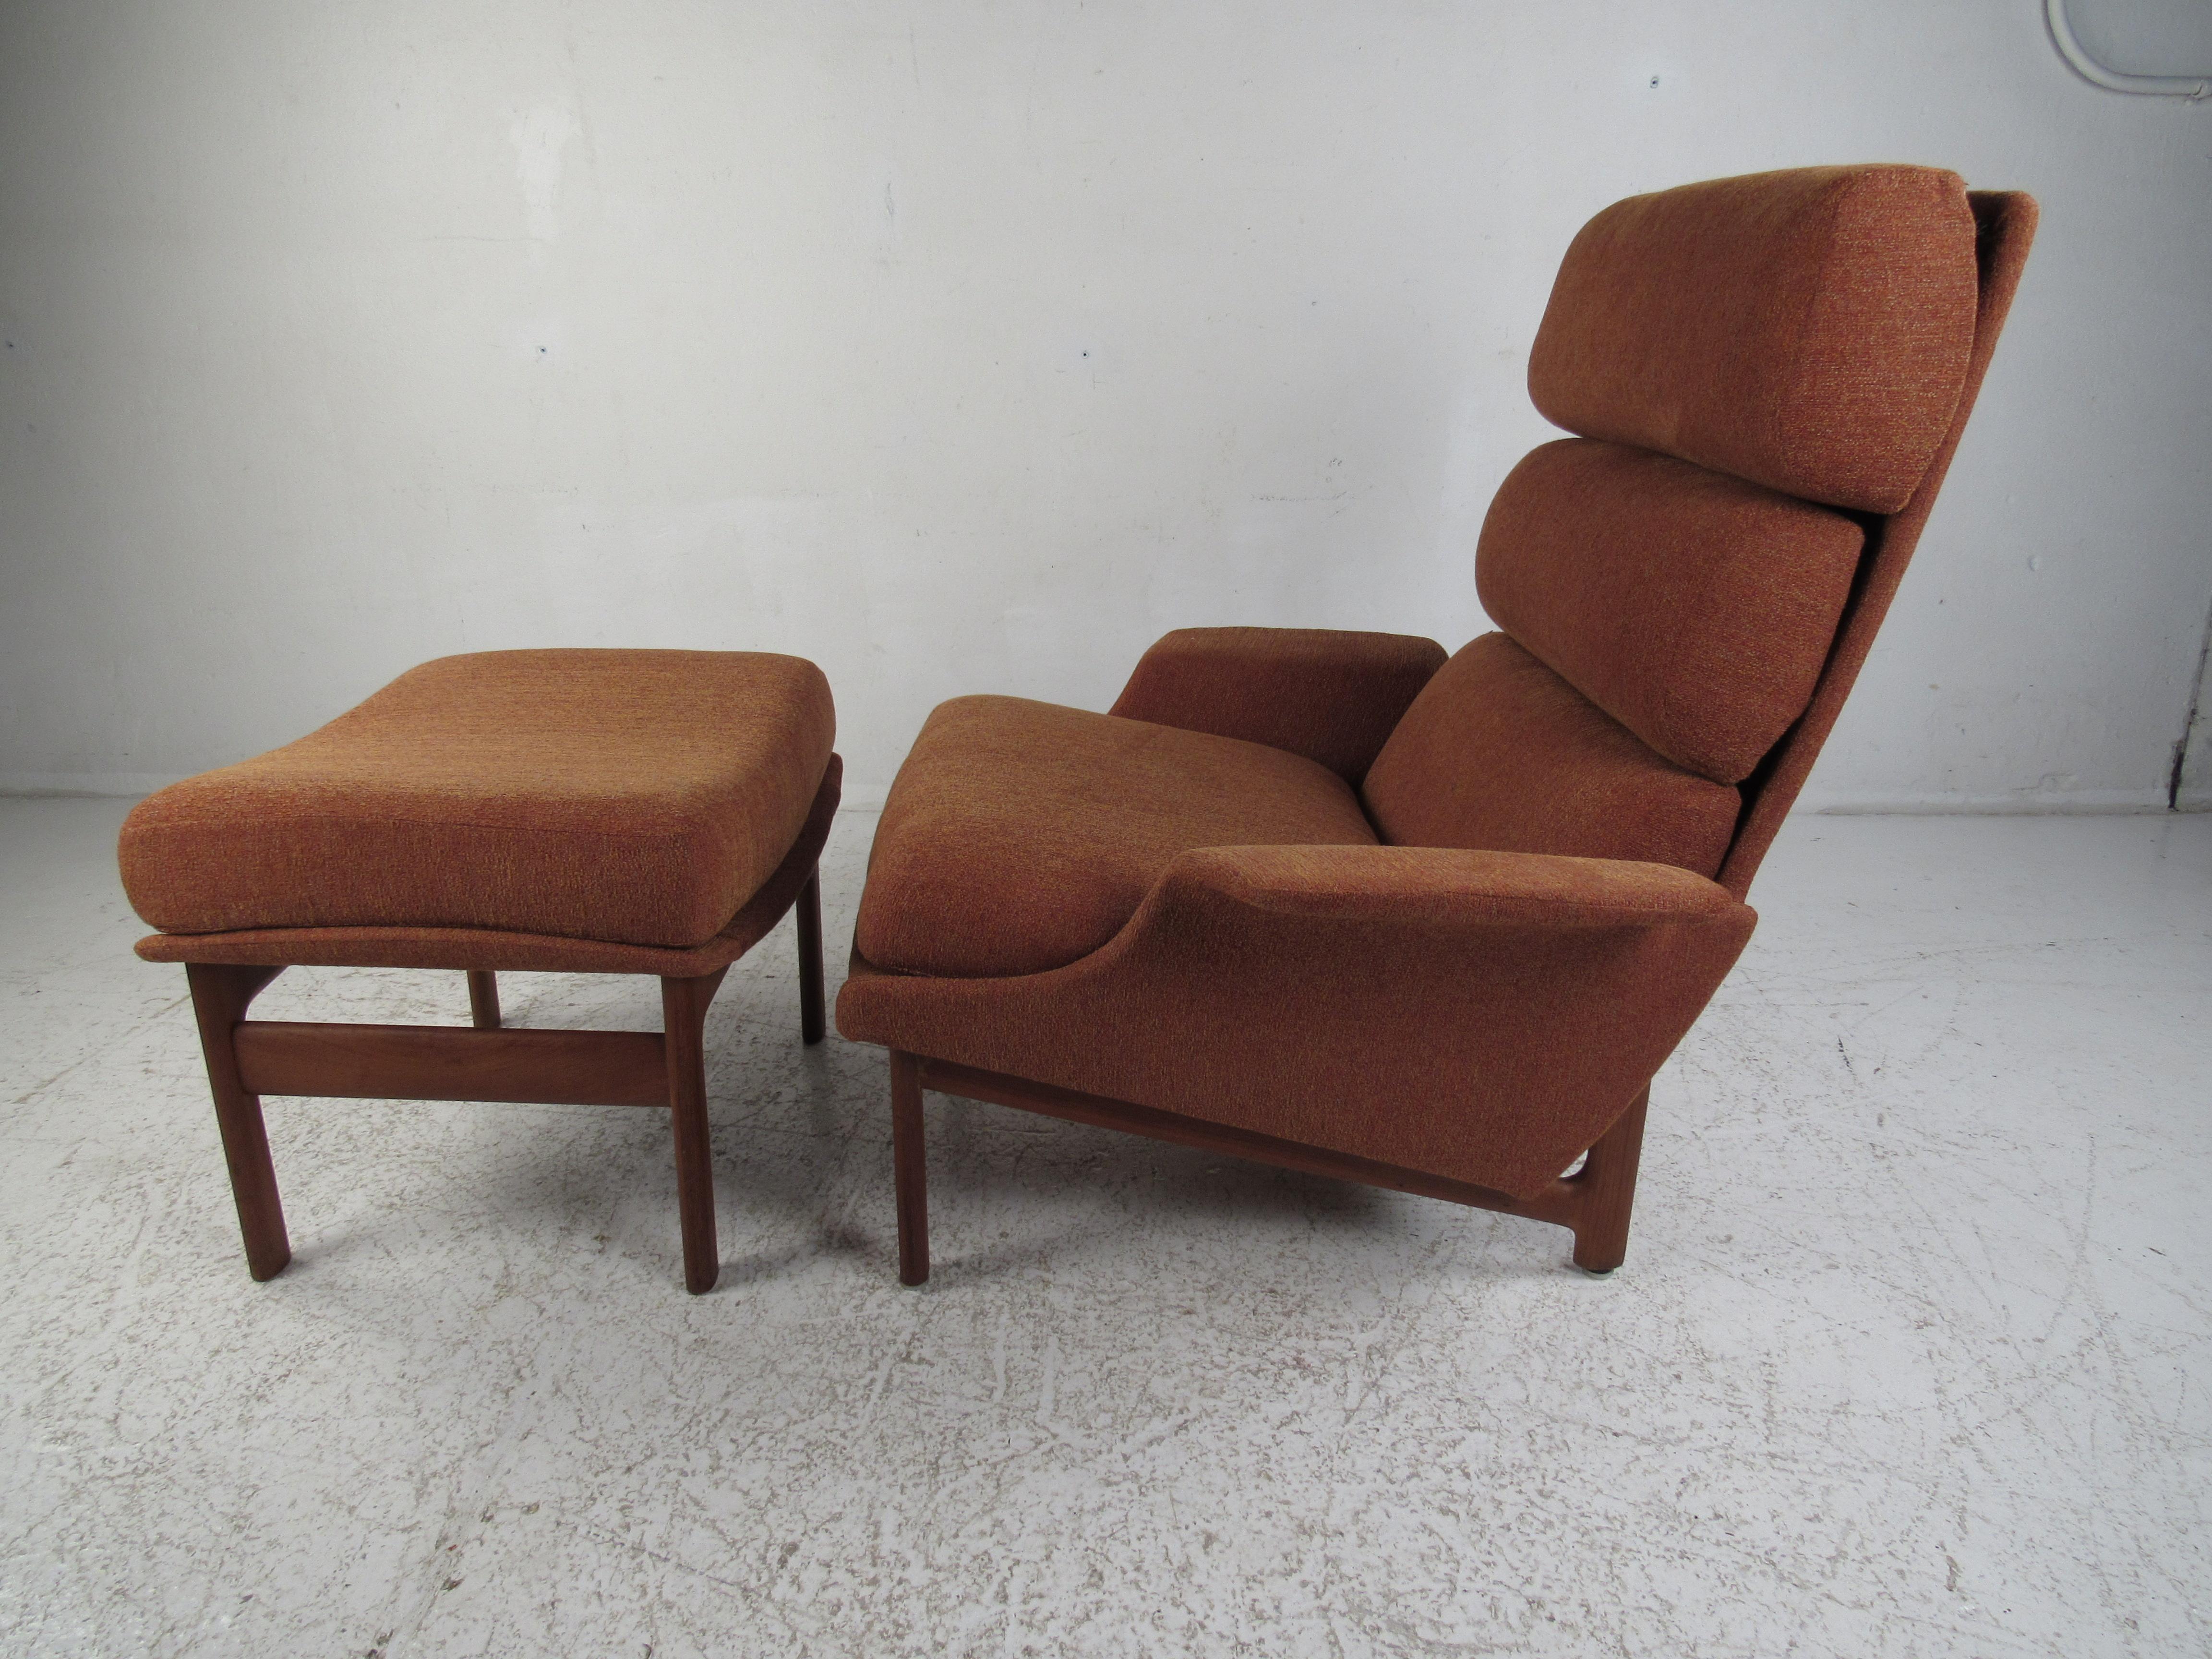 This stunning Mid-Century Modern lounge chair boasts winged arm rests, a high backrest and overstuffed cushions. This rare armchair and matching ottoman sit on a sturdy teak base. The soft orange colored upholstery and angled design ensures maximum